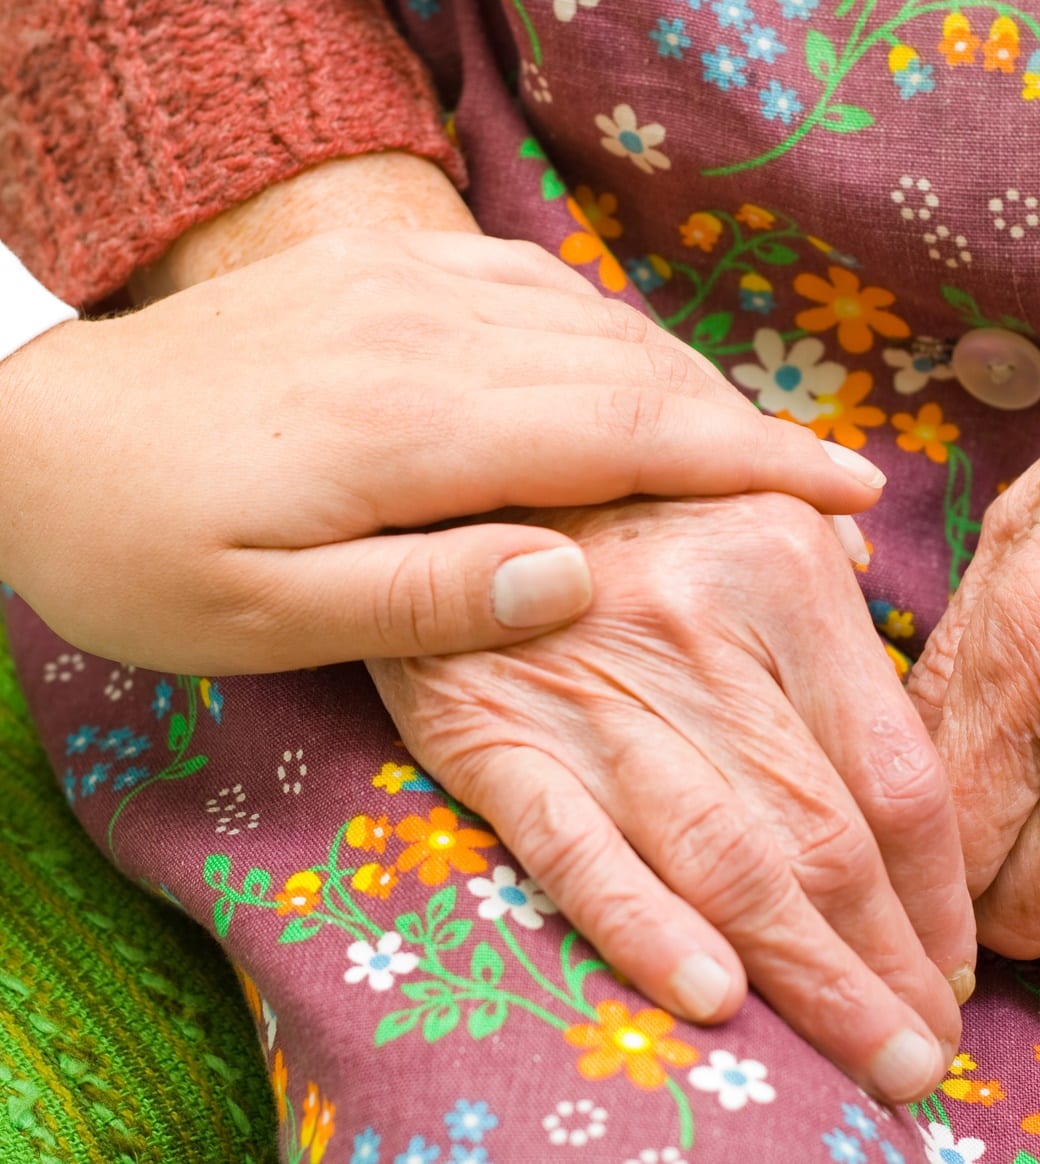 In-Home Senior Care Benefits